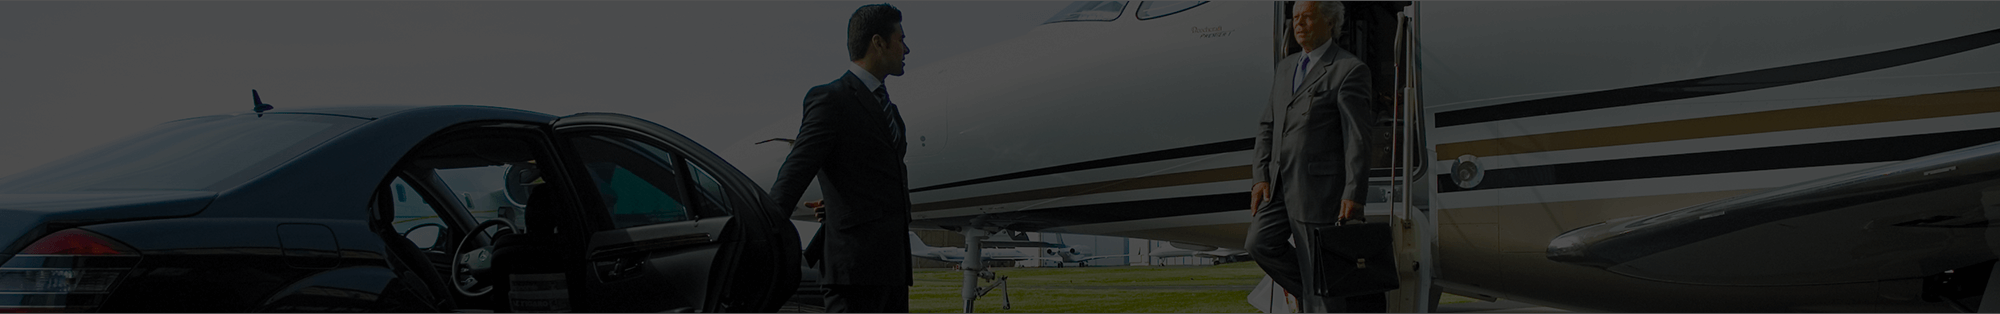 Airport Transfers header image